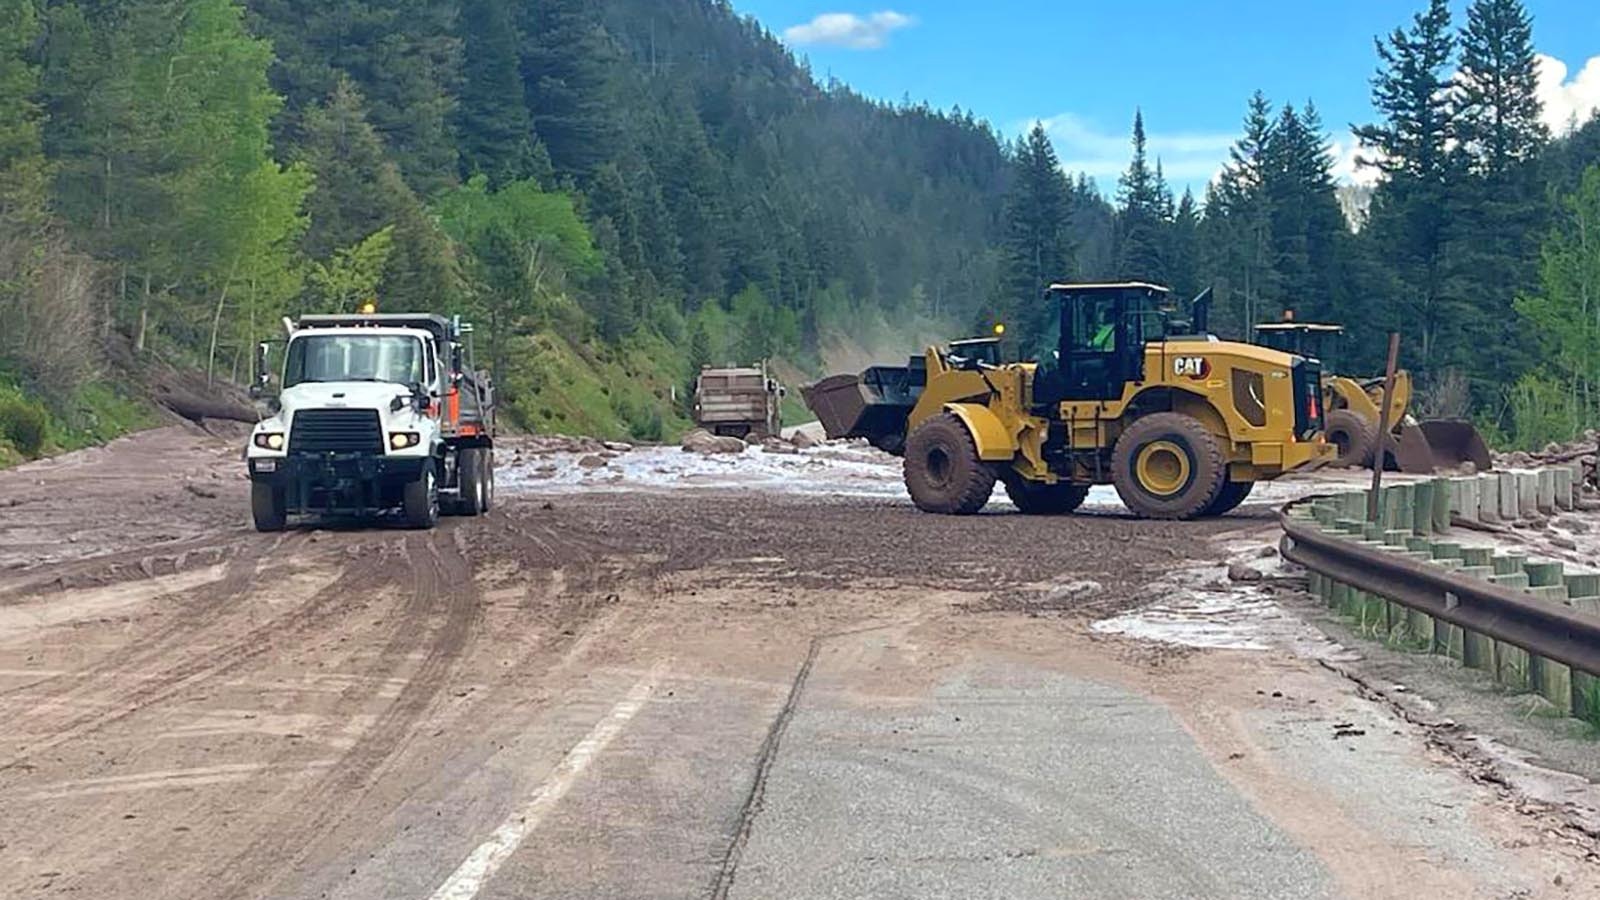 Wyoming's eastern neighbor of Idaho responded to the Teton Pass collapse with some help.